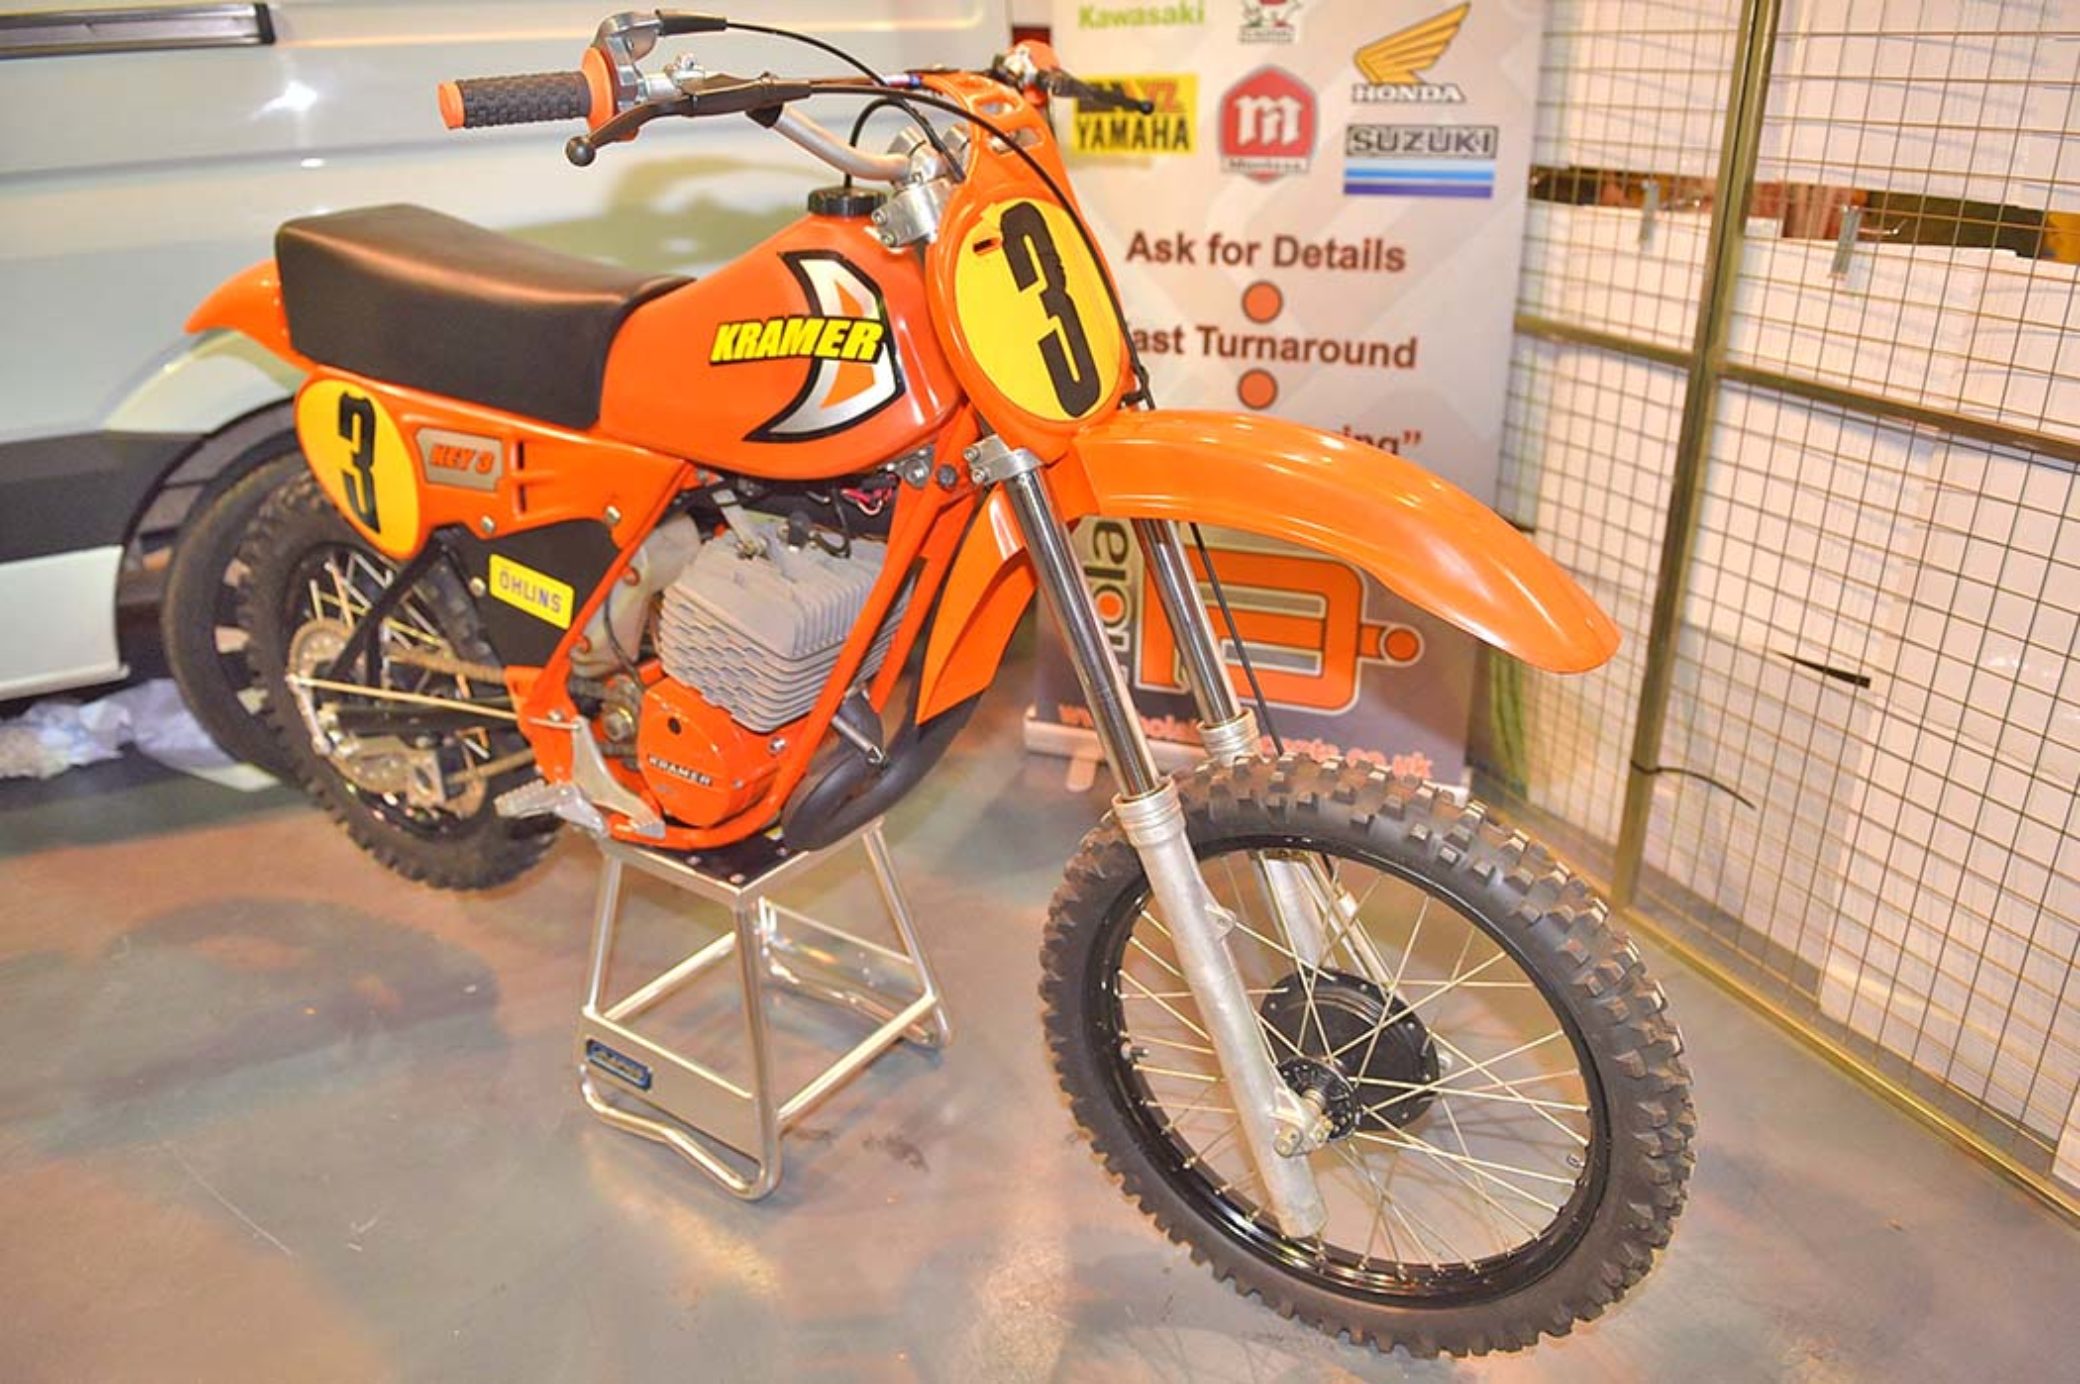 The Classic Dirt Bike Show was once again a massive success